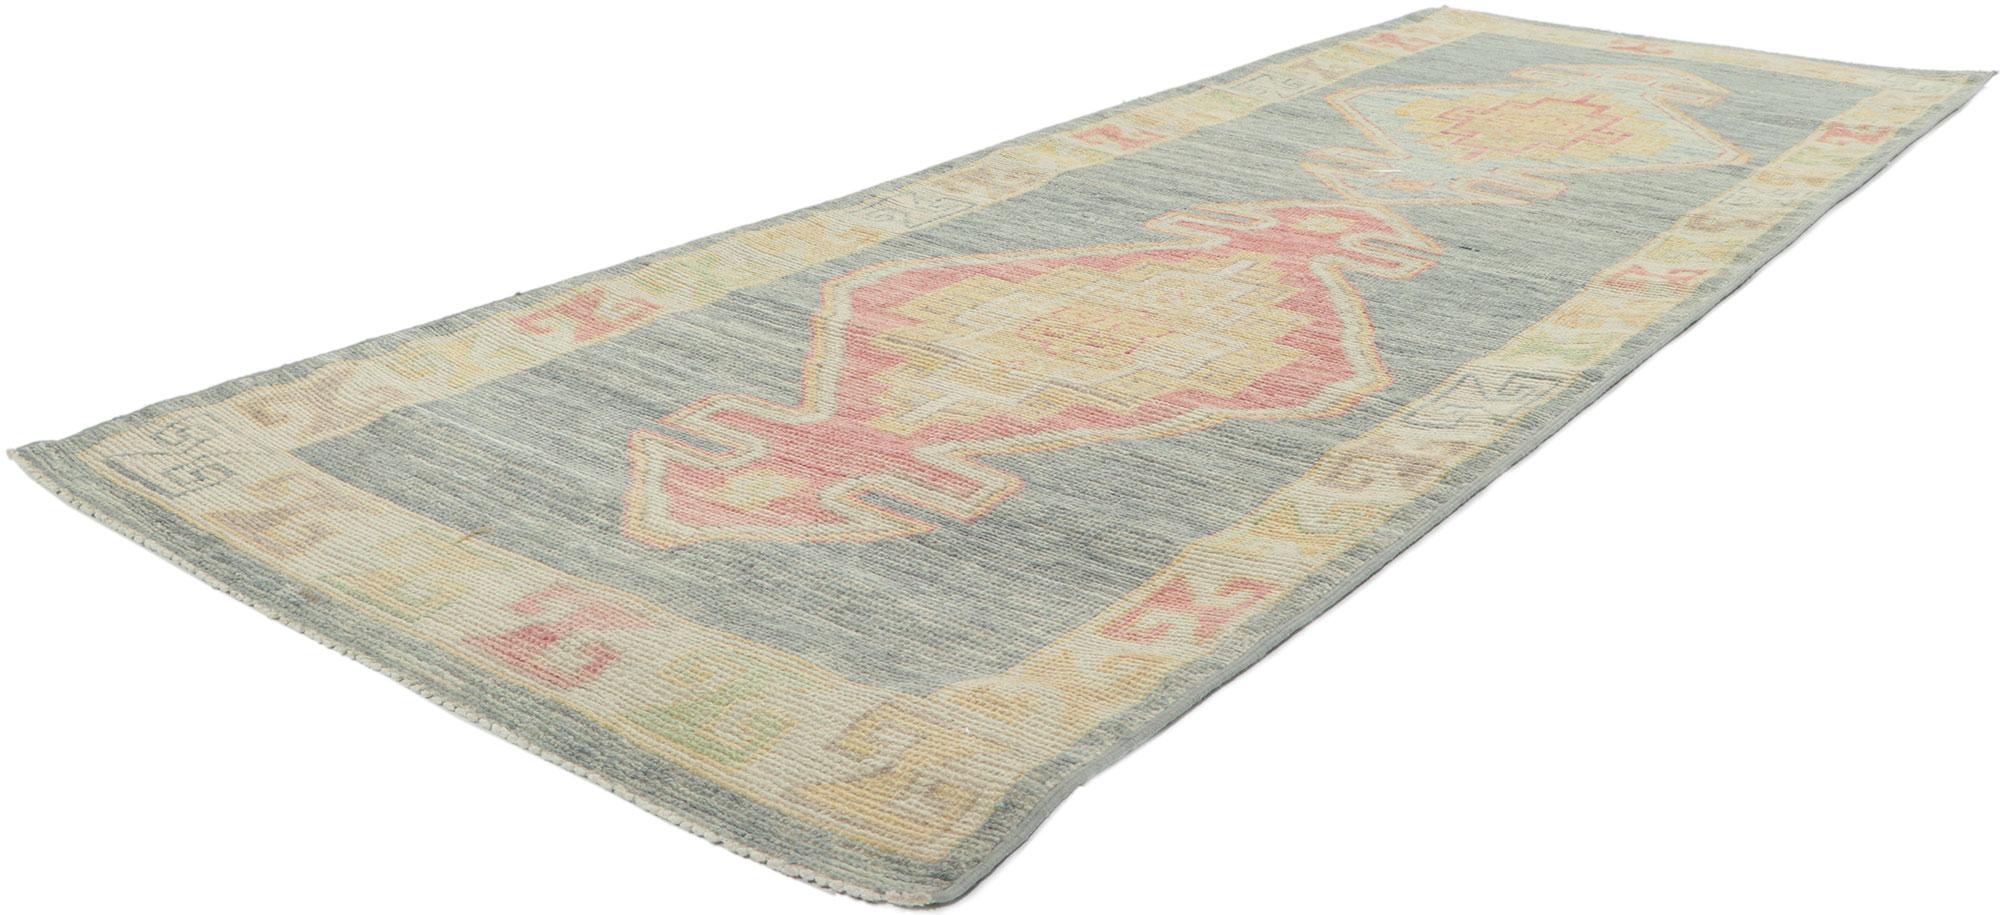 80855 Vintage-Inspired Oushak runner, 02'10 x 08'02. Polished and playful with a hint of nomadic charm, this hand-knotted wool vintage-inspired Oushak runner beautifully embodies a modern style. The abrashed field features two medallions decorated